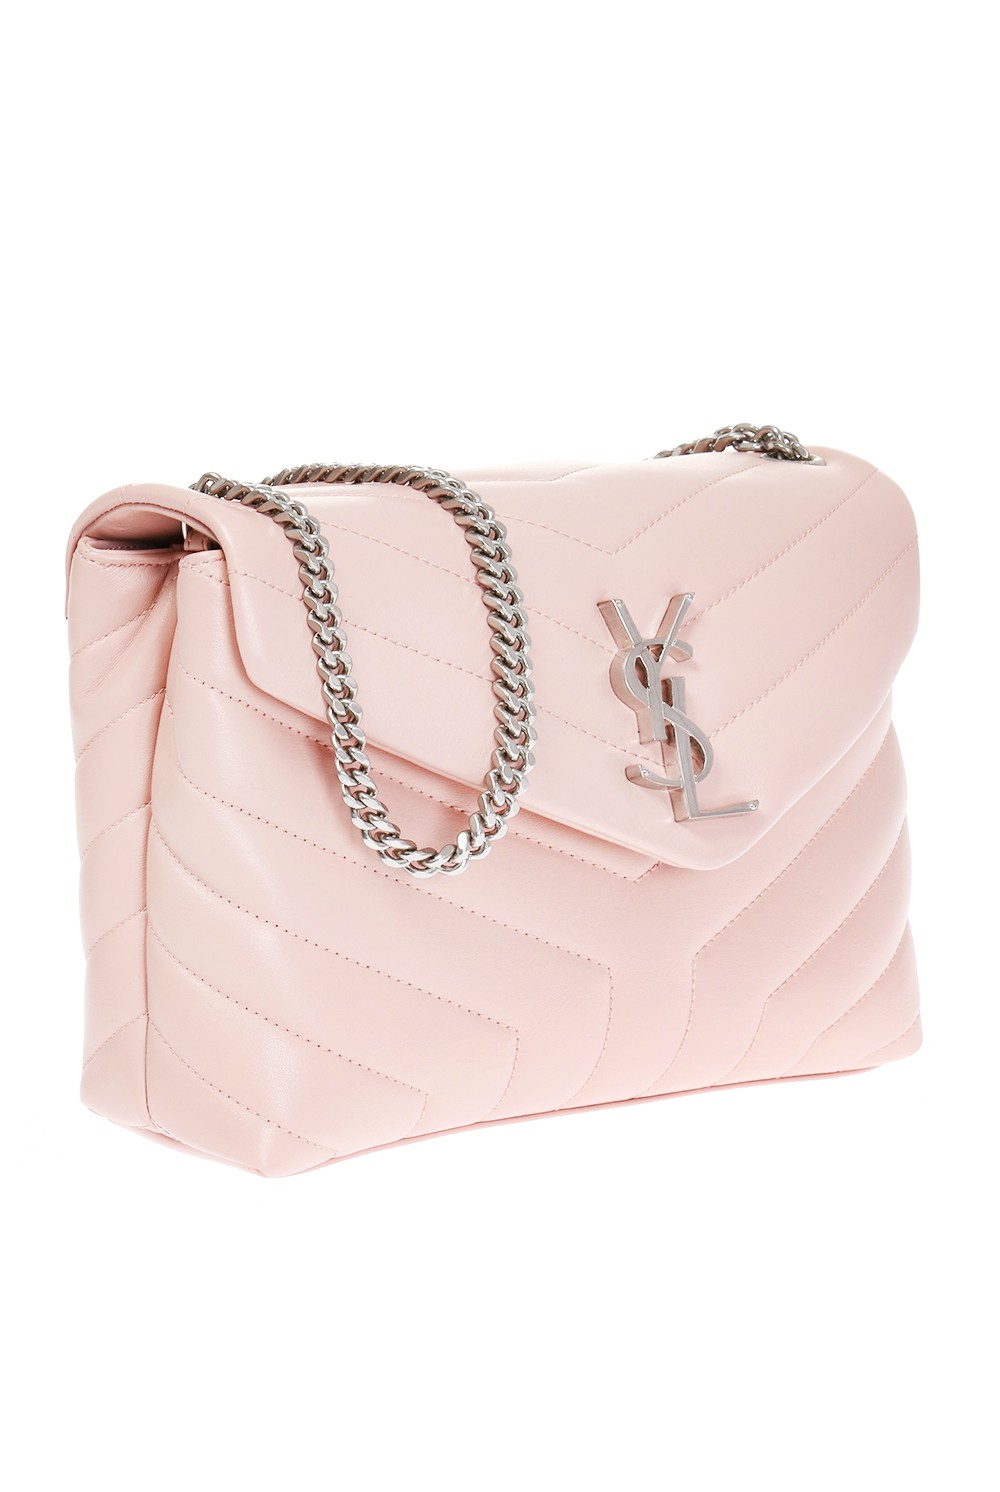 Saint Laurent Small Loulou Chain Bag in Pink